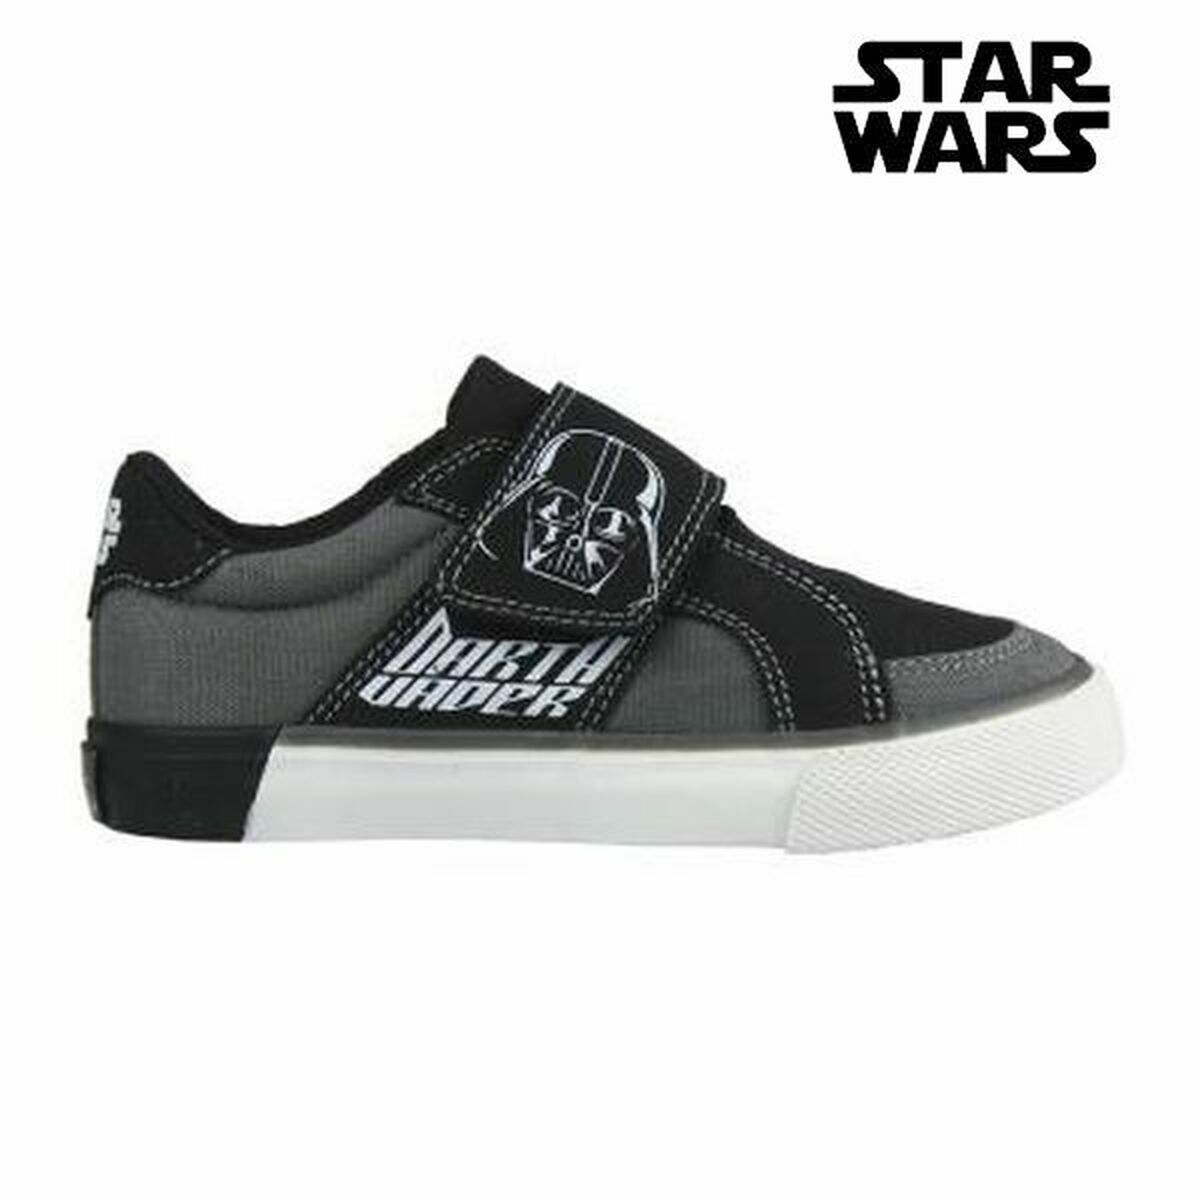 Chaussures casual Star Wars 4813 (taille 28)